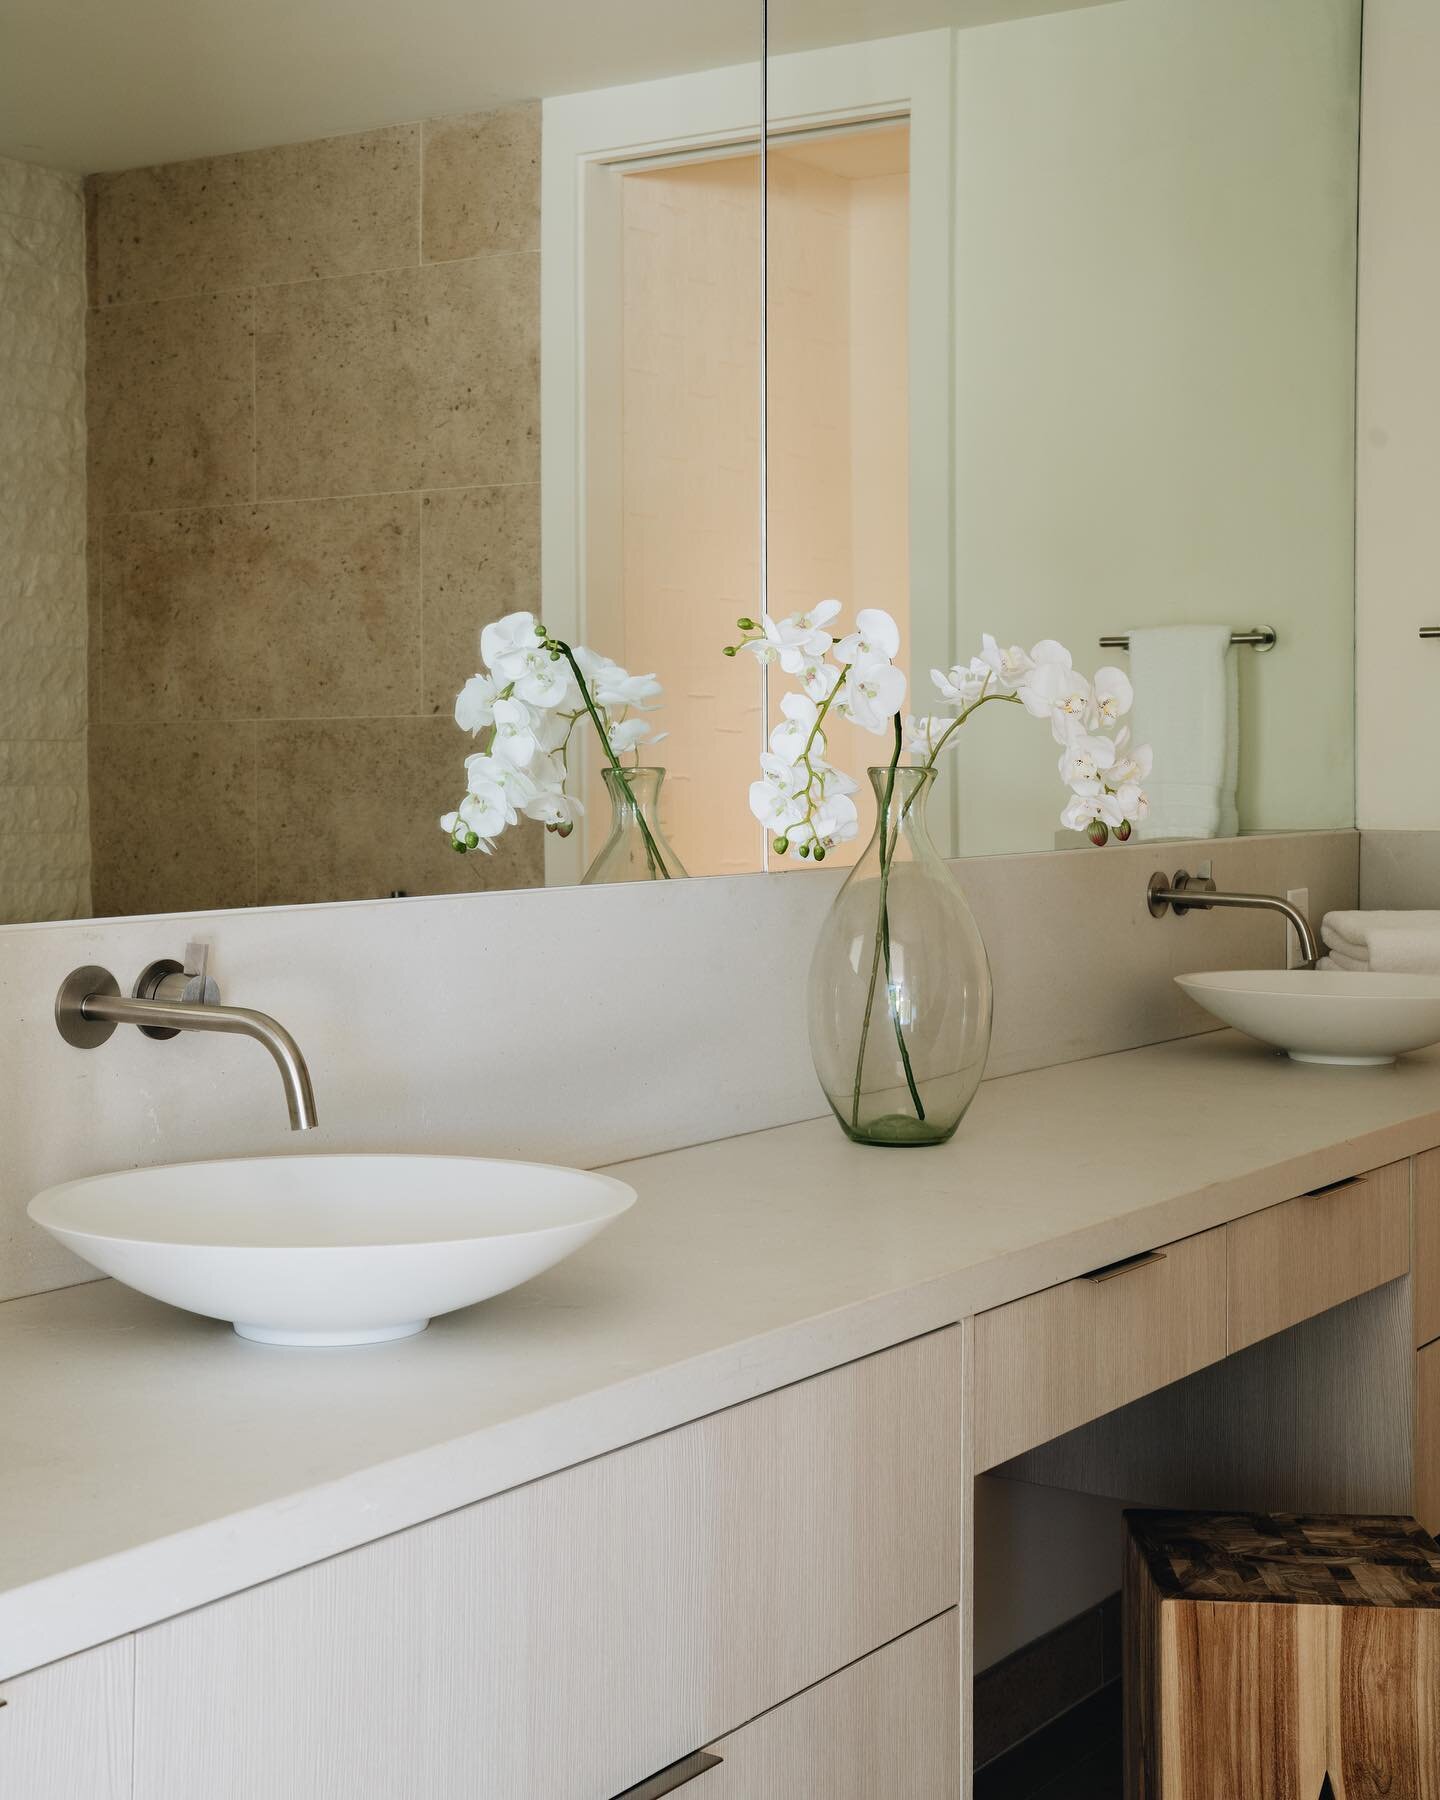 Wishing we got ready for our Monday in this bathroom.

Photography by @jle_behindthelens

#noestudio #residentialdesign #homedesign #interiordesigner #hawaiiinteriordesign #bathroom #bathroomdesign #kahala #materials #oahudesign #hawaii #honoluludesi